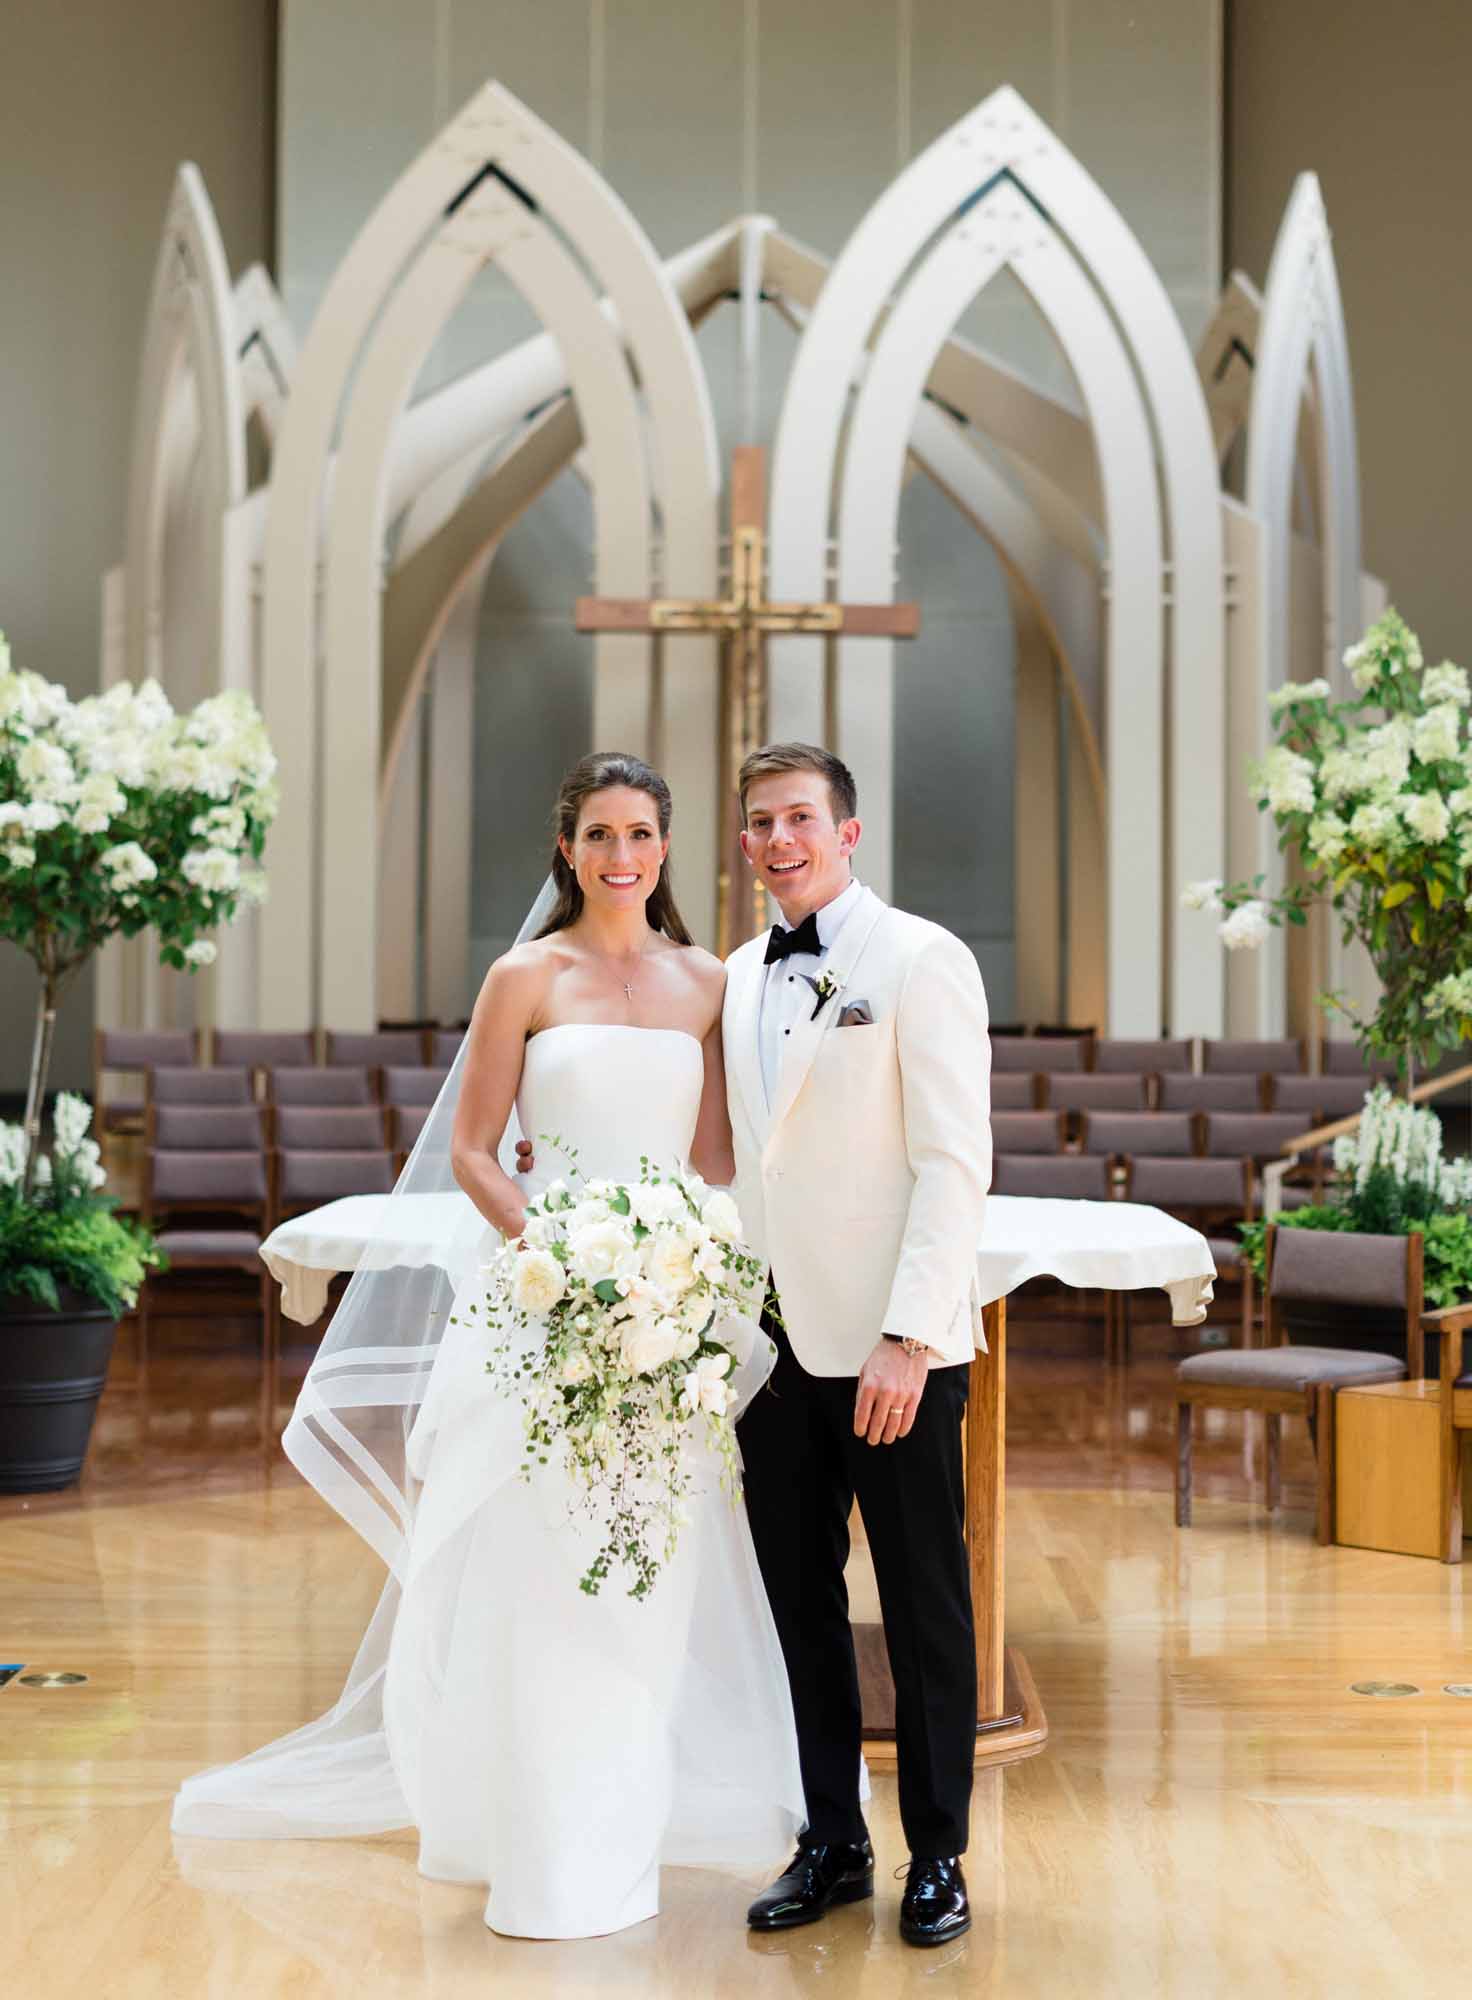 Bride and groom in front of church altar at their wedding